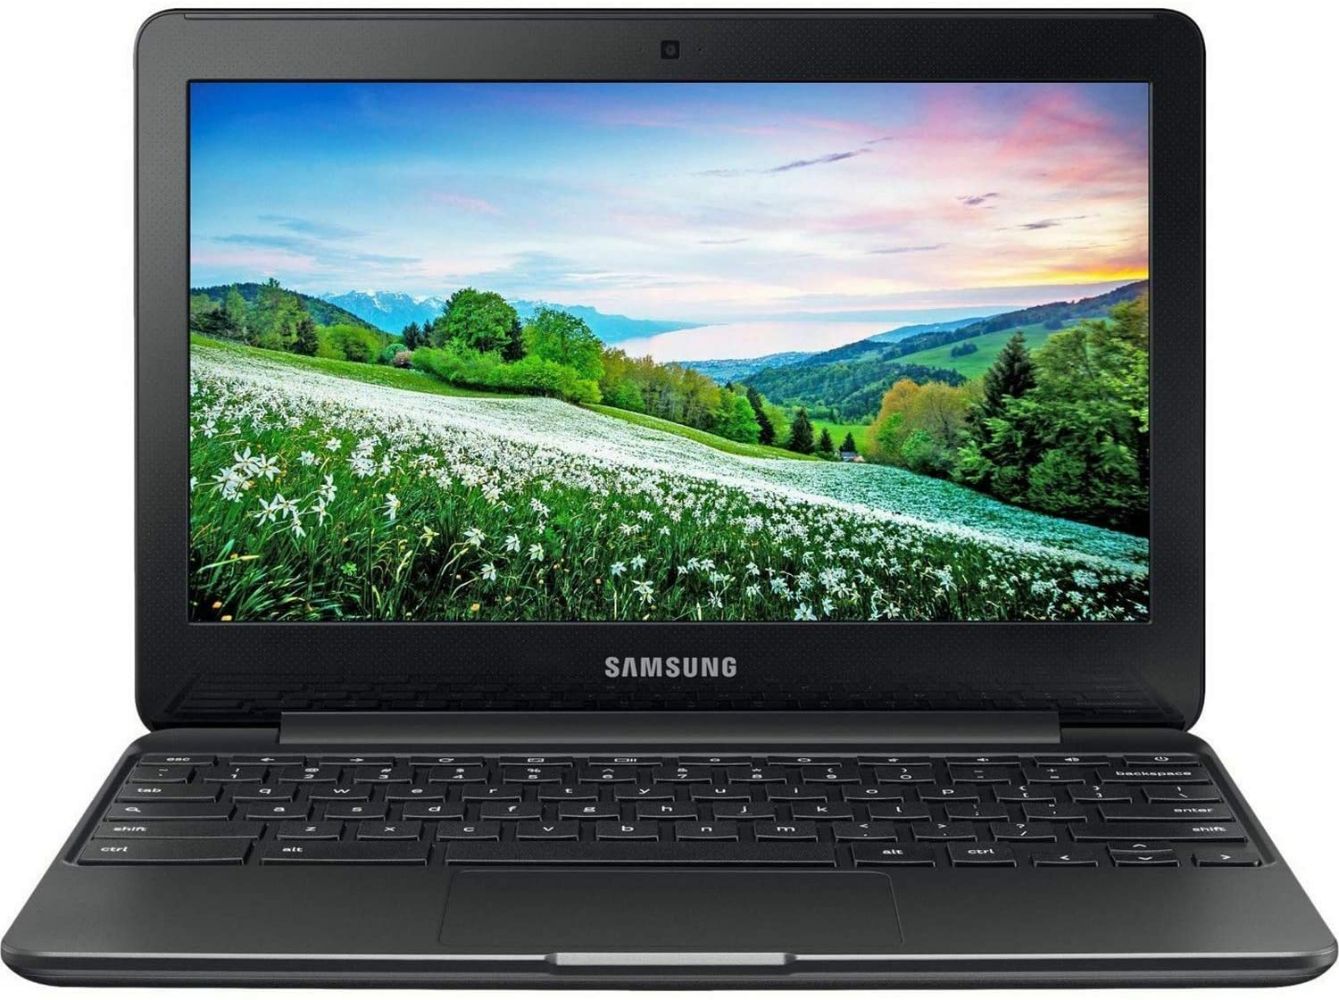 Trade Sale Of Over 1000 Samsung Chromebooks Direct From Leasing Company